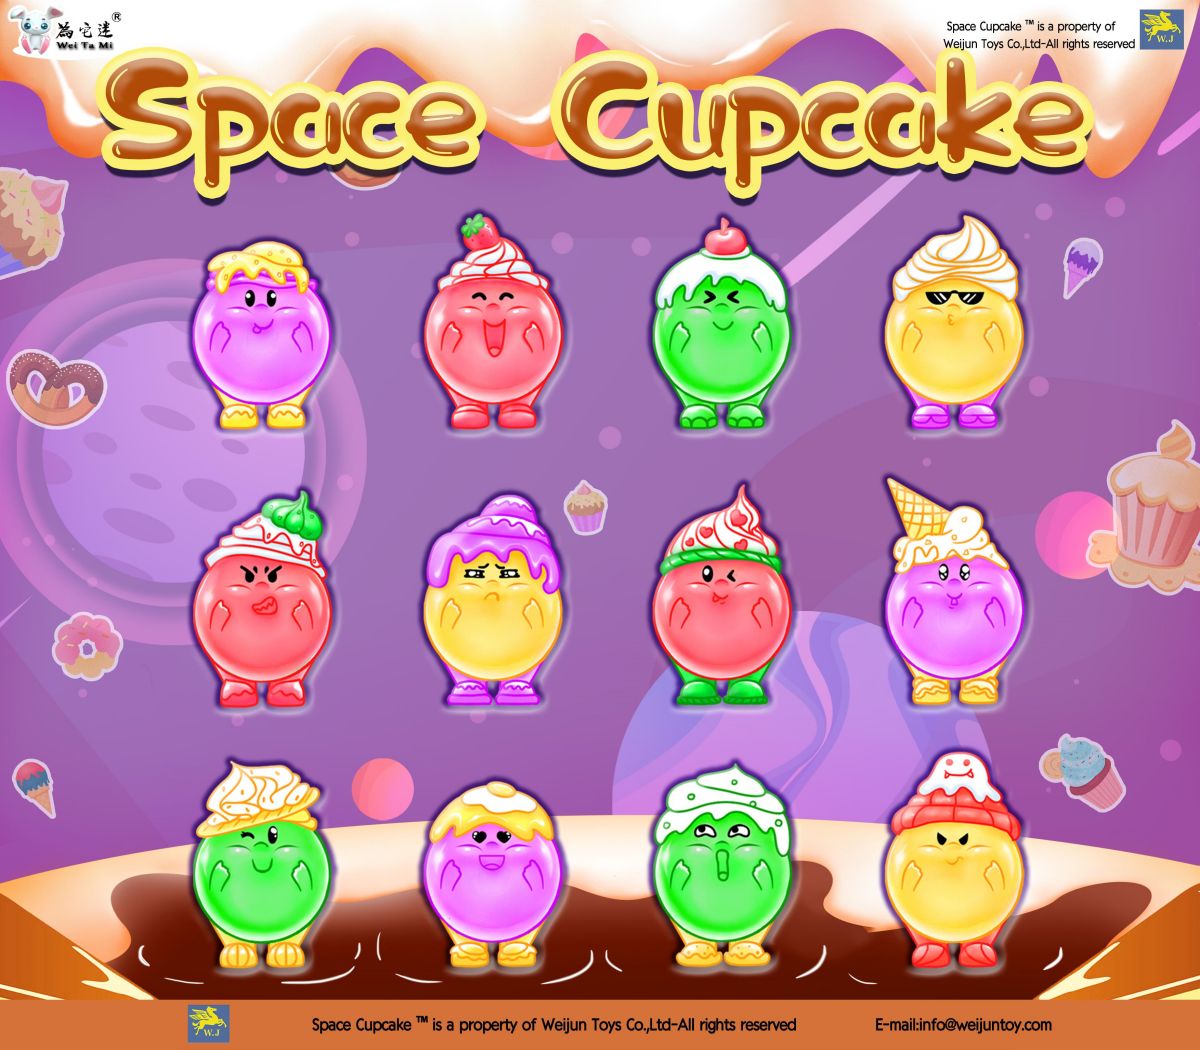 Just how beautiful are Wei Jun’s new space cupcake Figures?